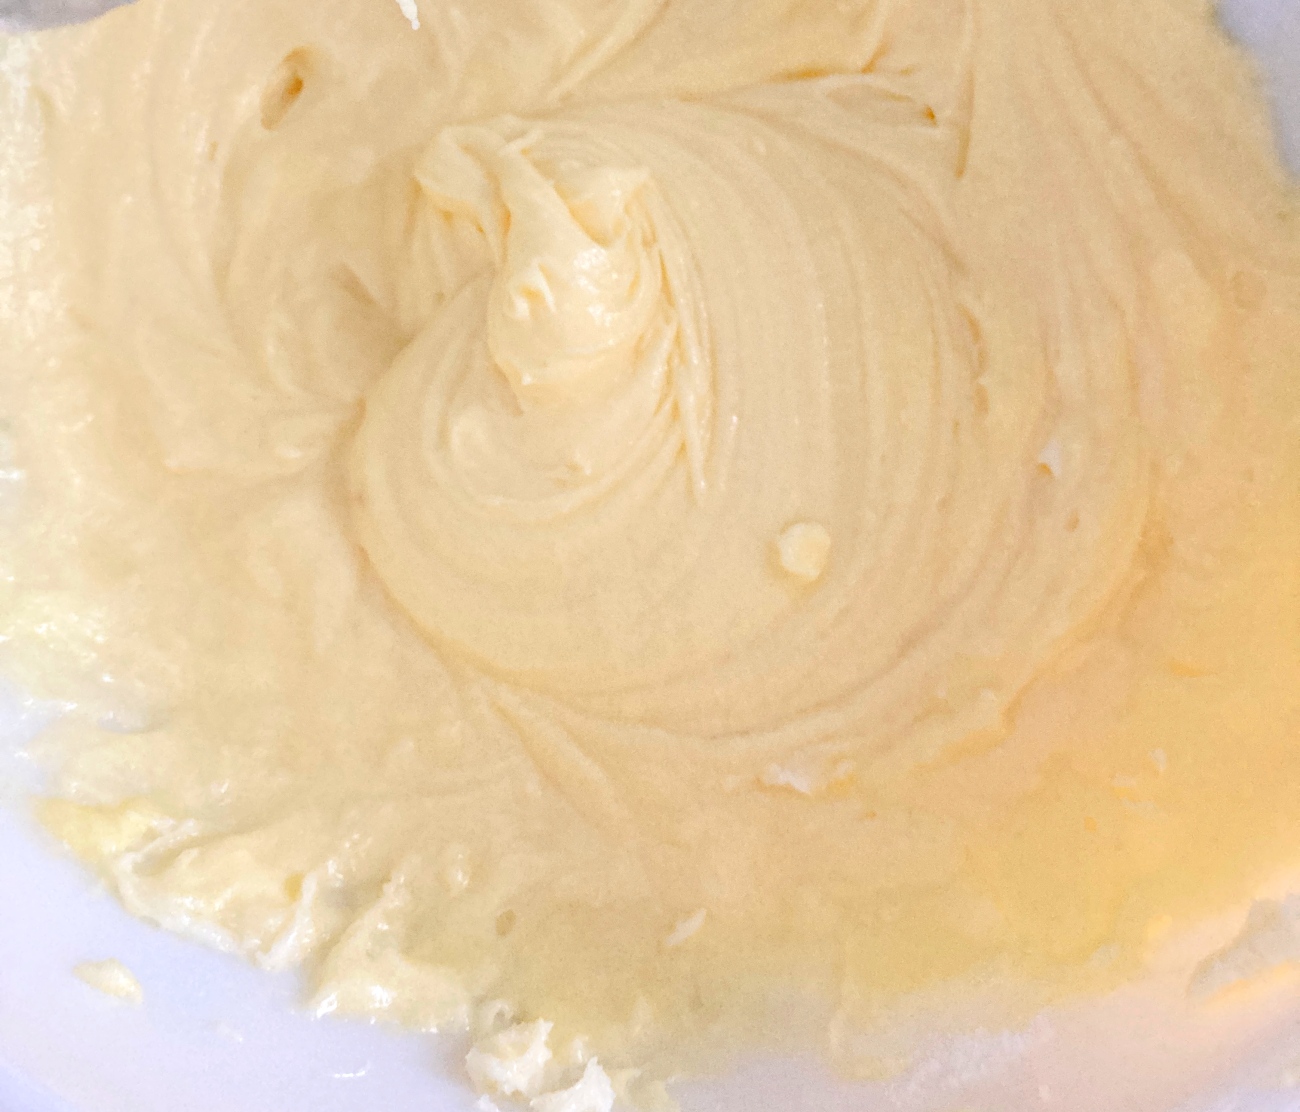 In another bowl cream together butter and sugar. Add eggs one at a time, stirring between each addition. Add milk and vanilla and stir again. Add dry ingredients to wet a little at a time, stirring as you go.